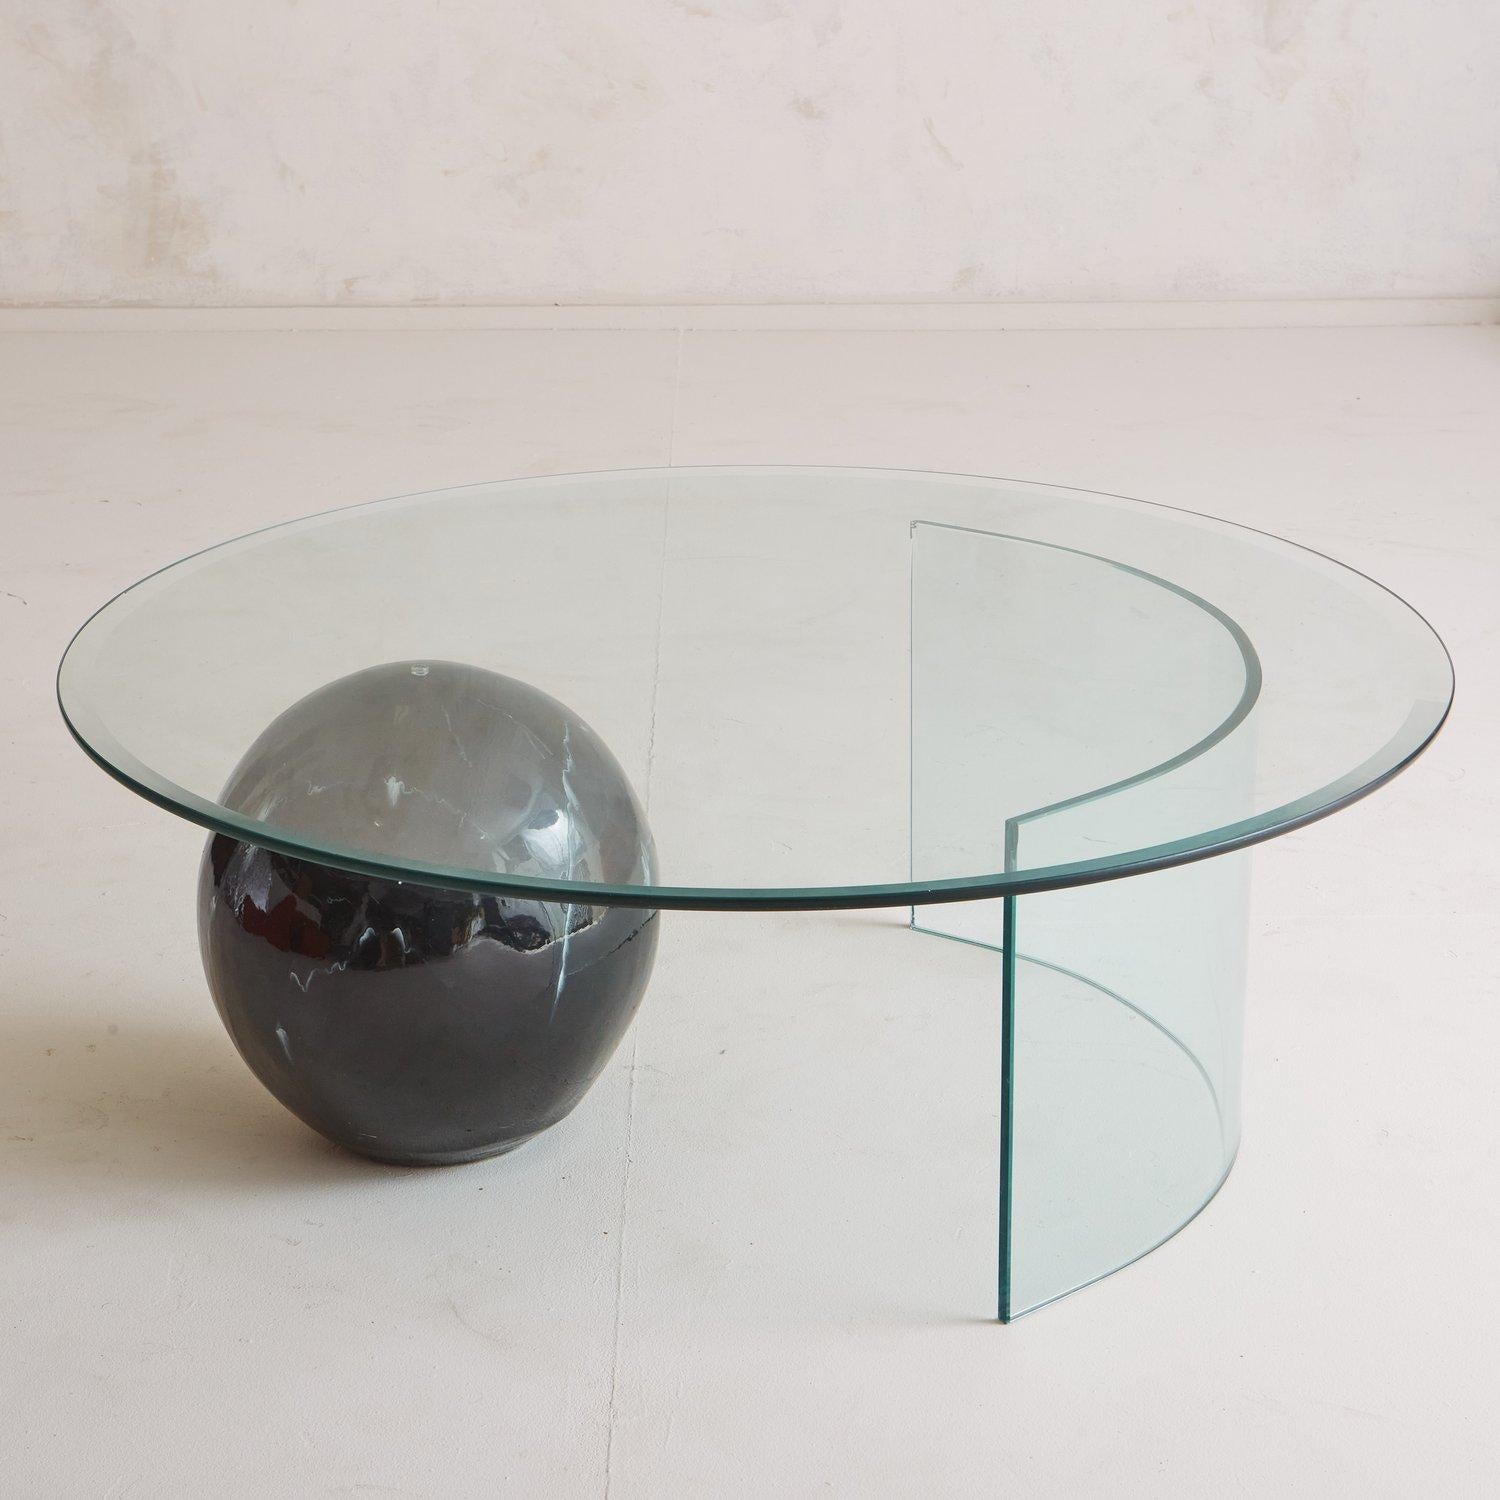 A Postmodern glass coffee table featuring a round .375” thick beveled glass tabletop resting on a black ceramic ball with a marble effect finish and a curved glass base. USA, 1980s.

 